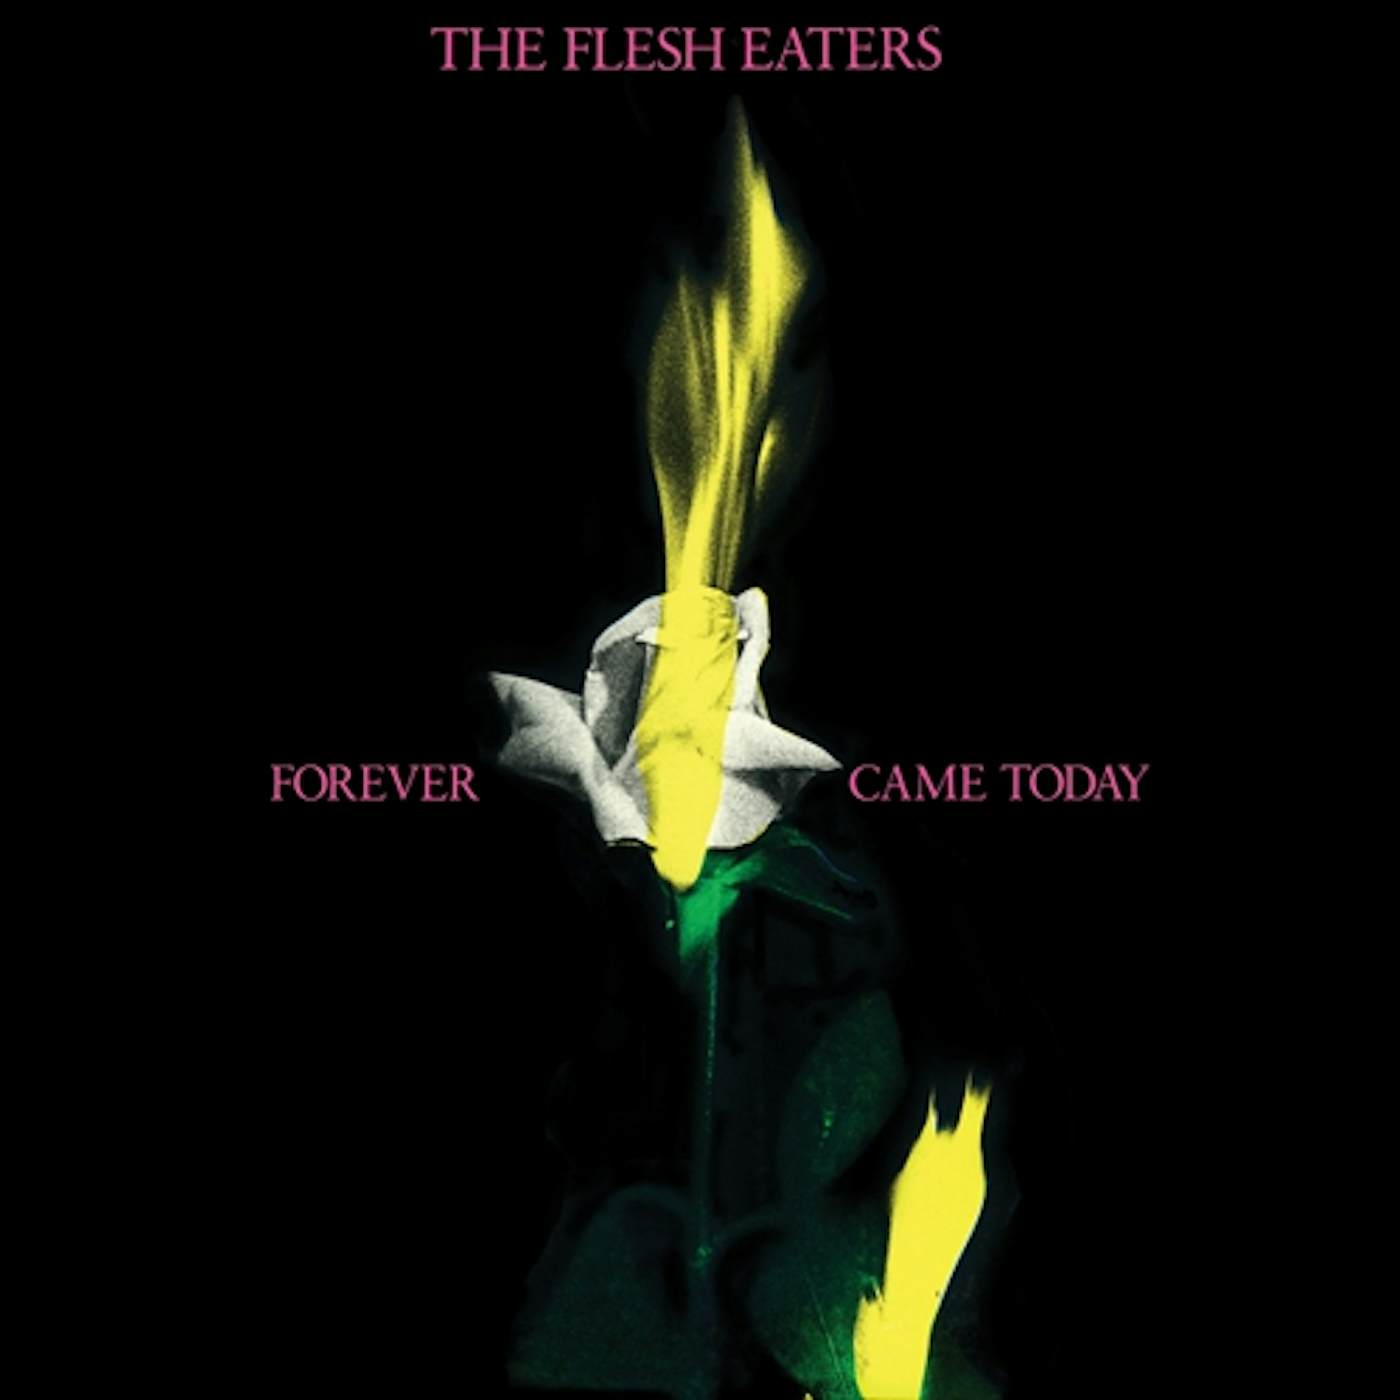 The Flesh Eaters Forever Came Today Vinyl Record